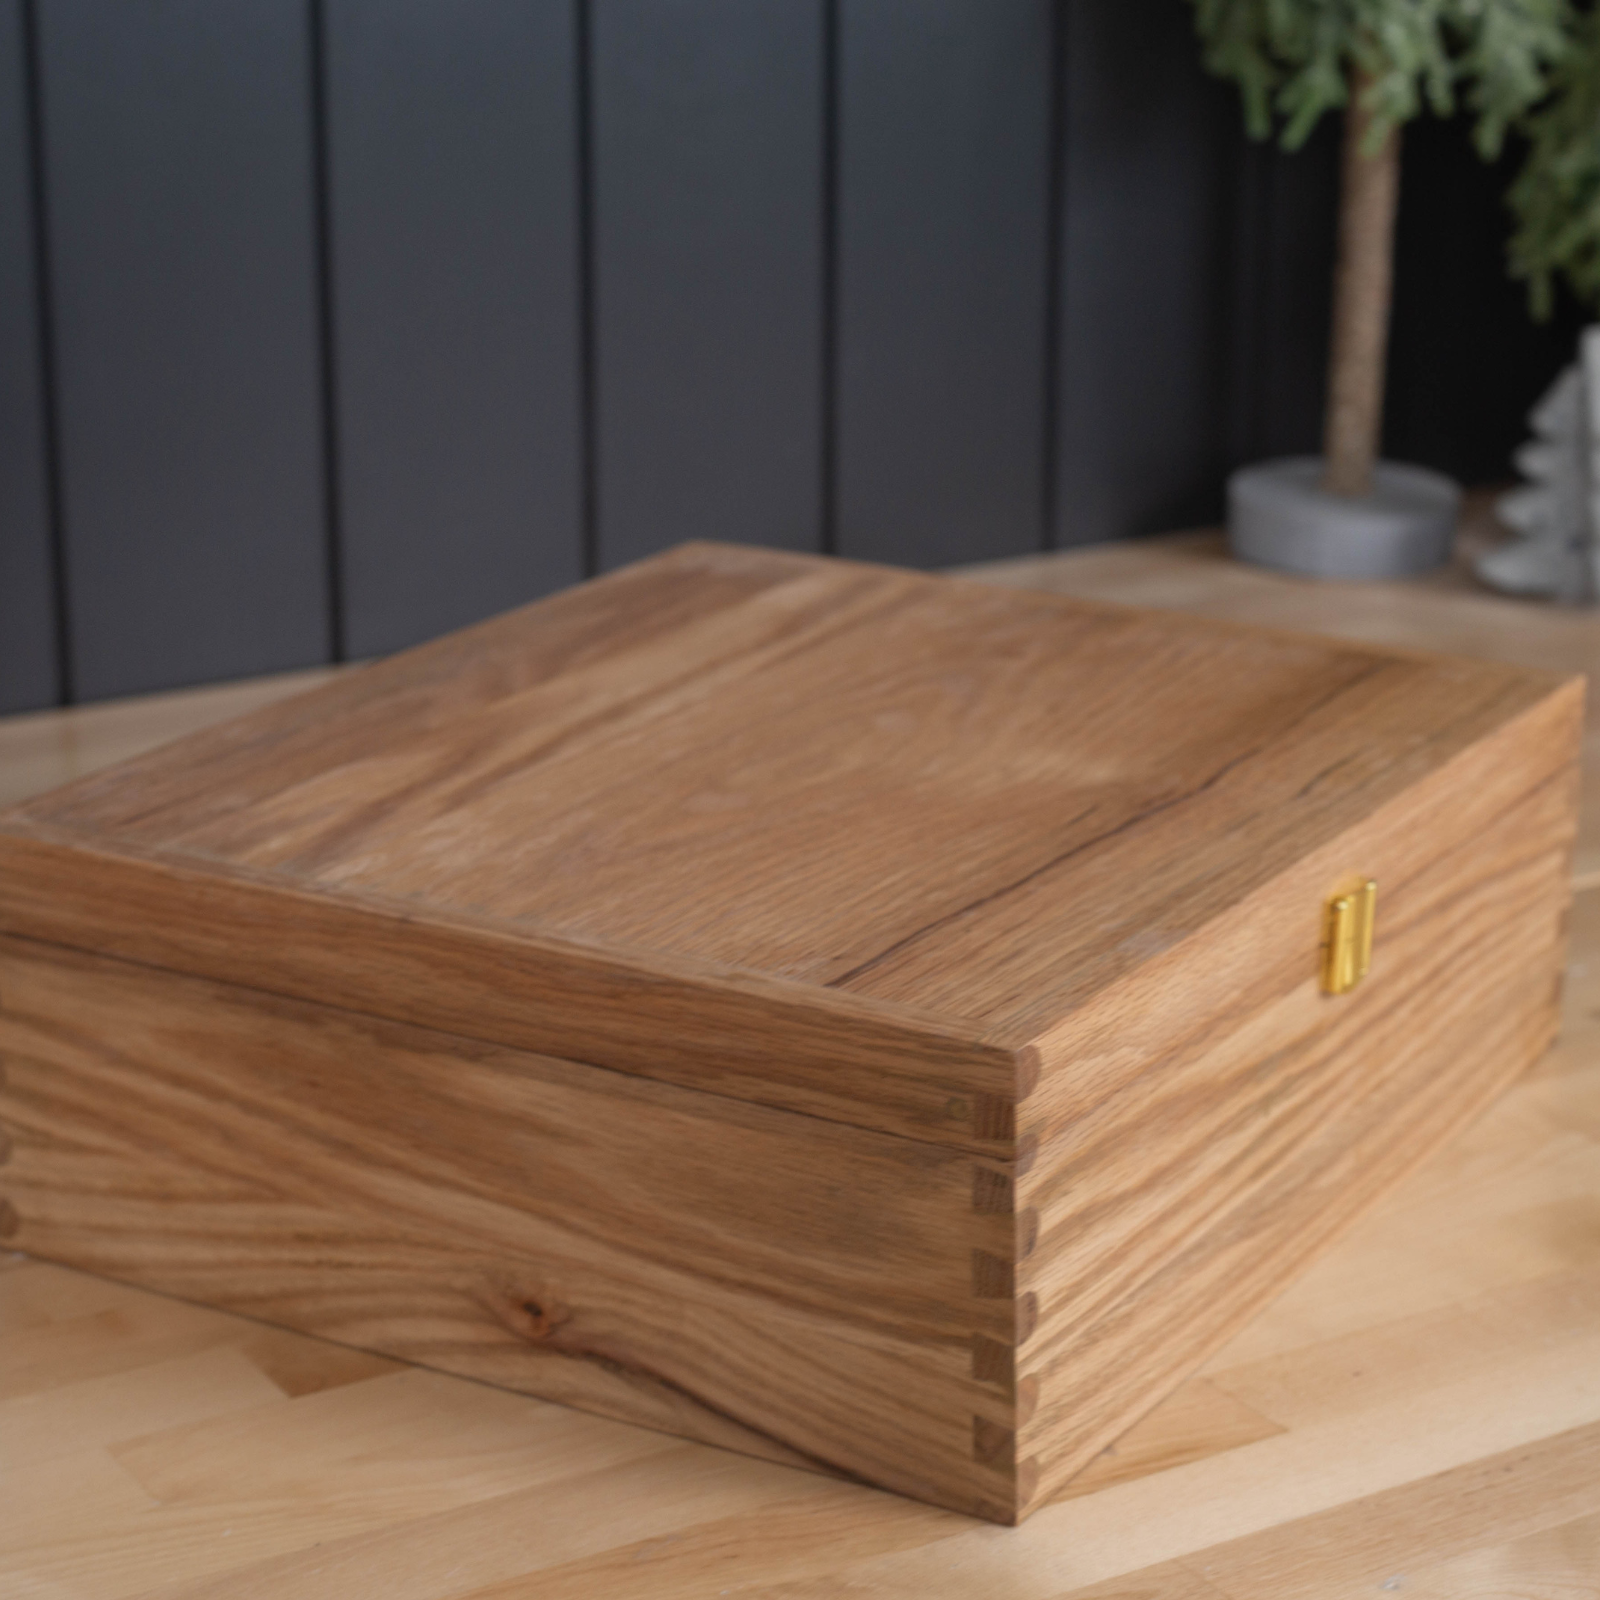 Keepsake box with dove tail joints